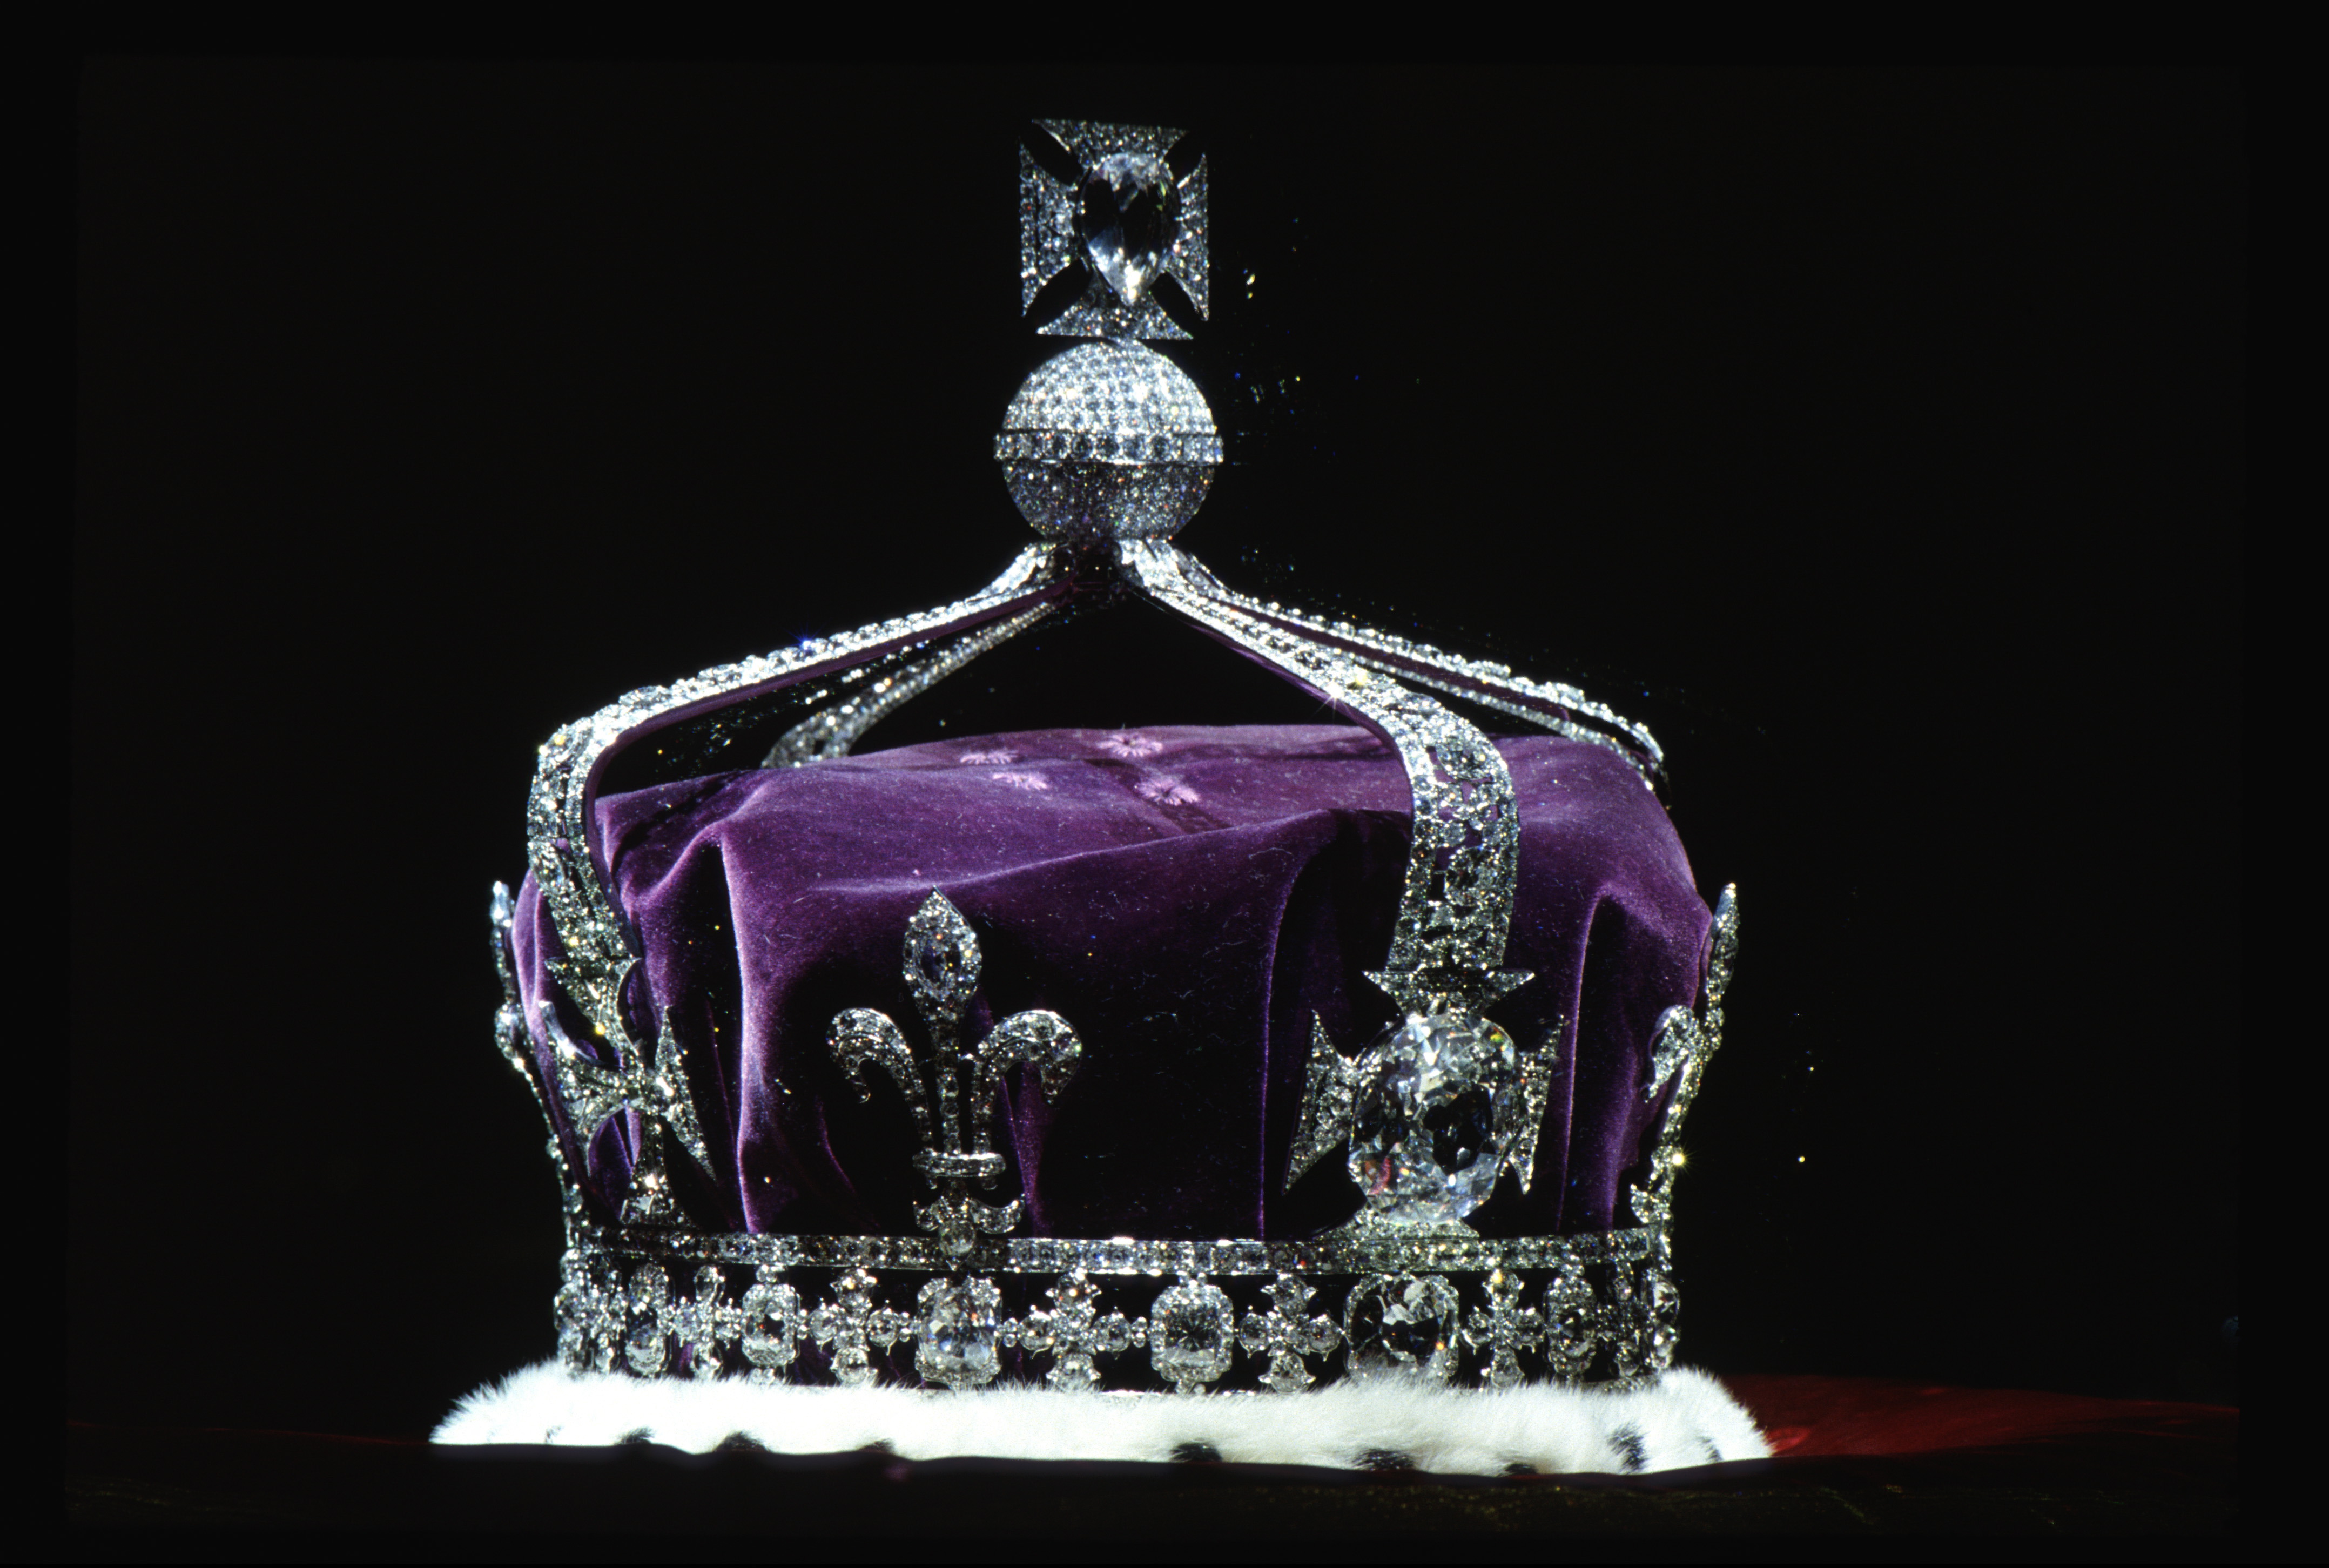 The Crown Of Queen Elizabeth The Queen Mother (1937) Made Of Platinum And Containing The Famous Koh-i-noor Diamond Along With Other Gems. (Tim Graham/Getty Images)